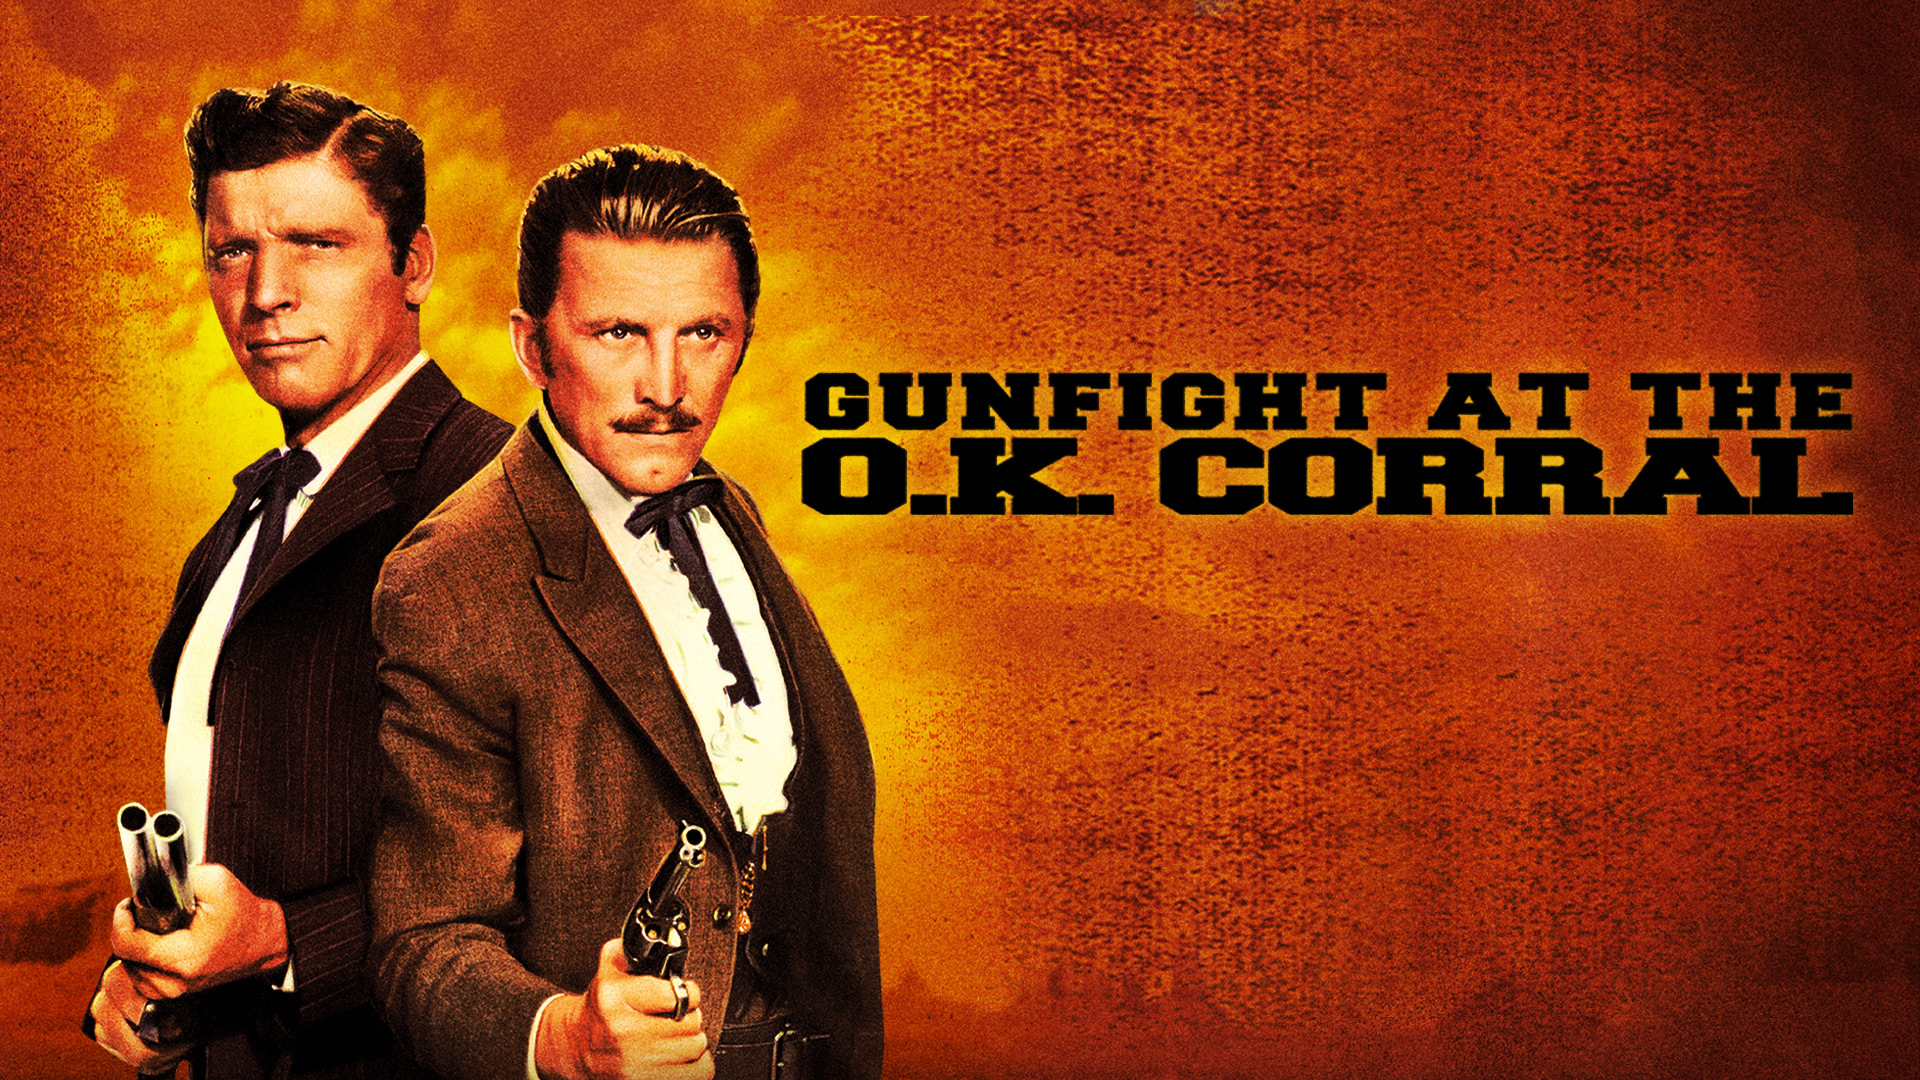 44-facts-about-the-movie-gunfight-at-the-o-k-corral